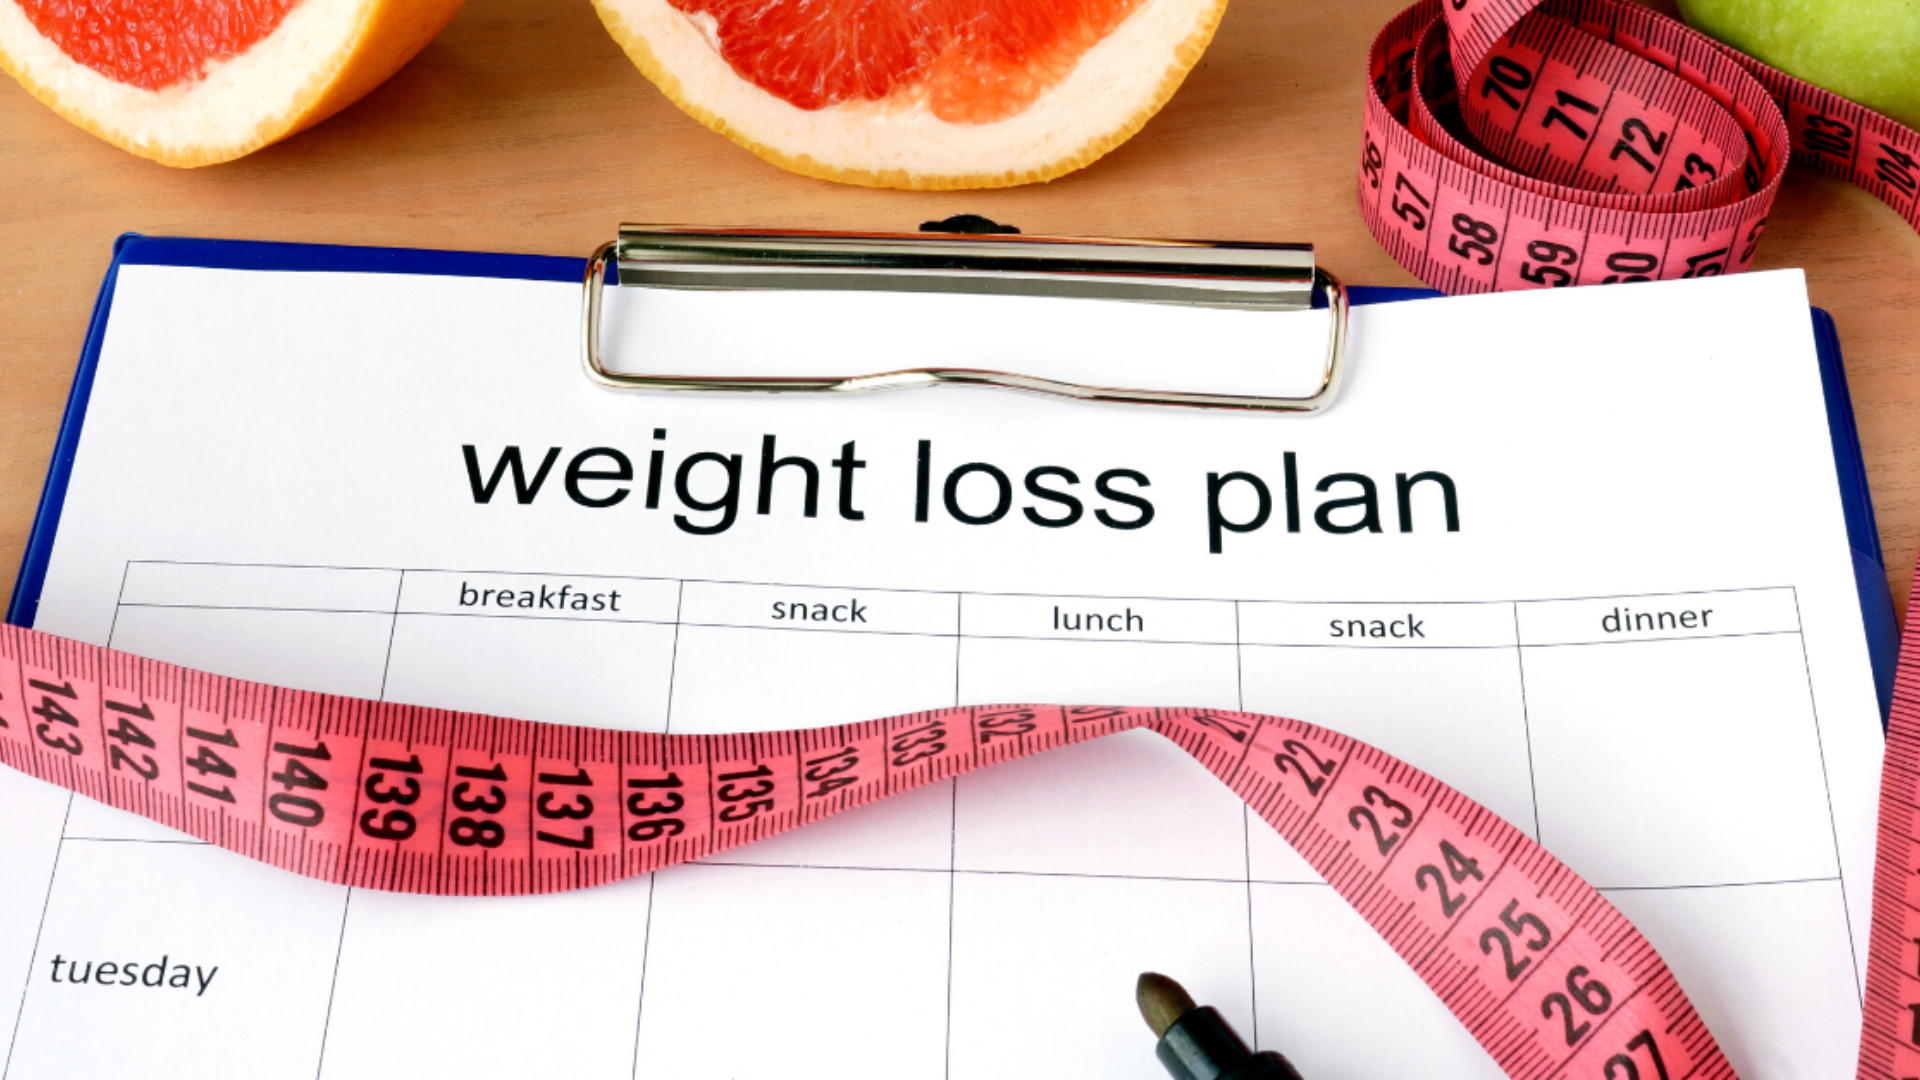 Free Weight Loss Plan: How to Achieve Your Goals Naturally image